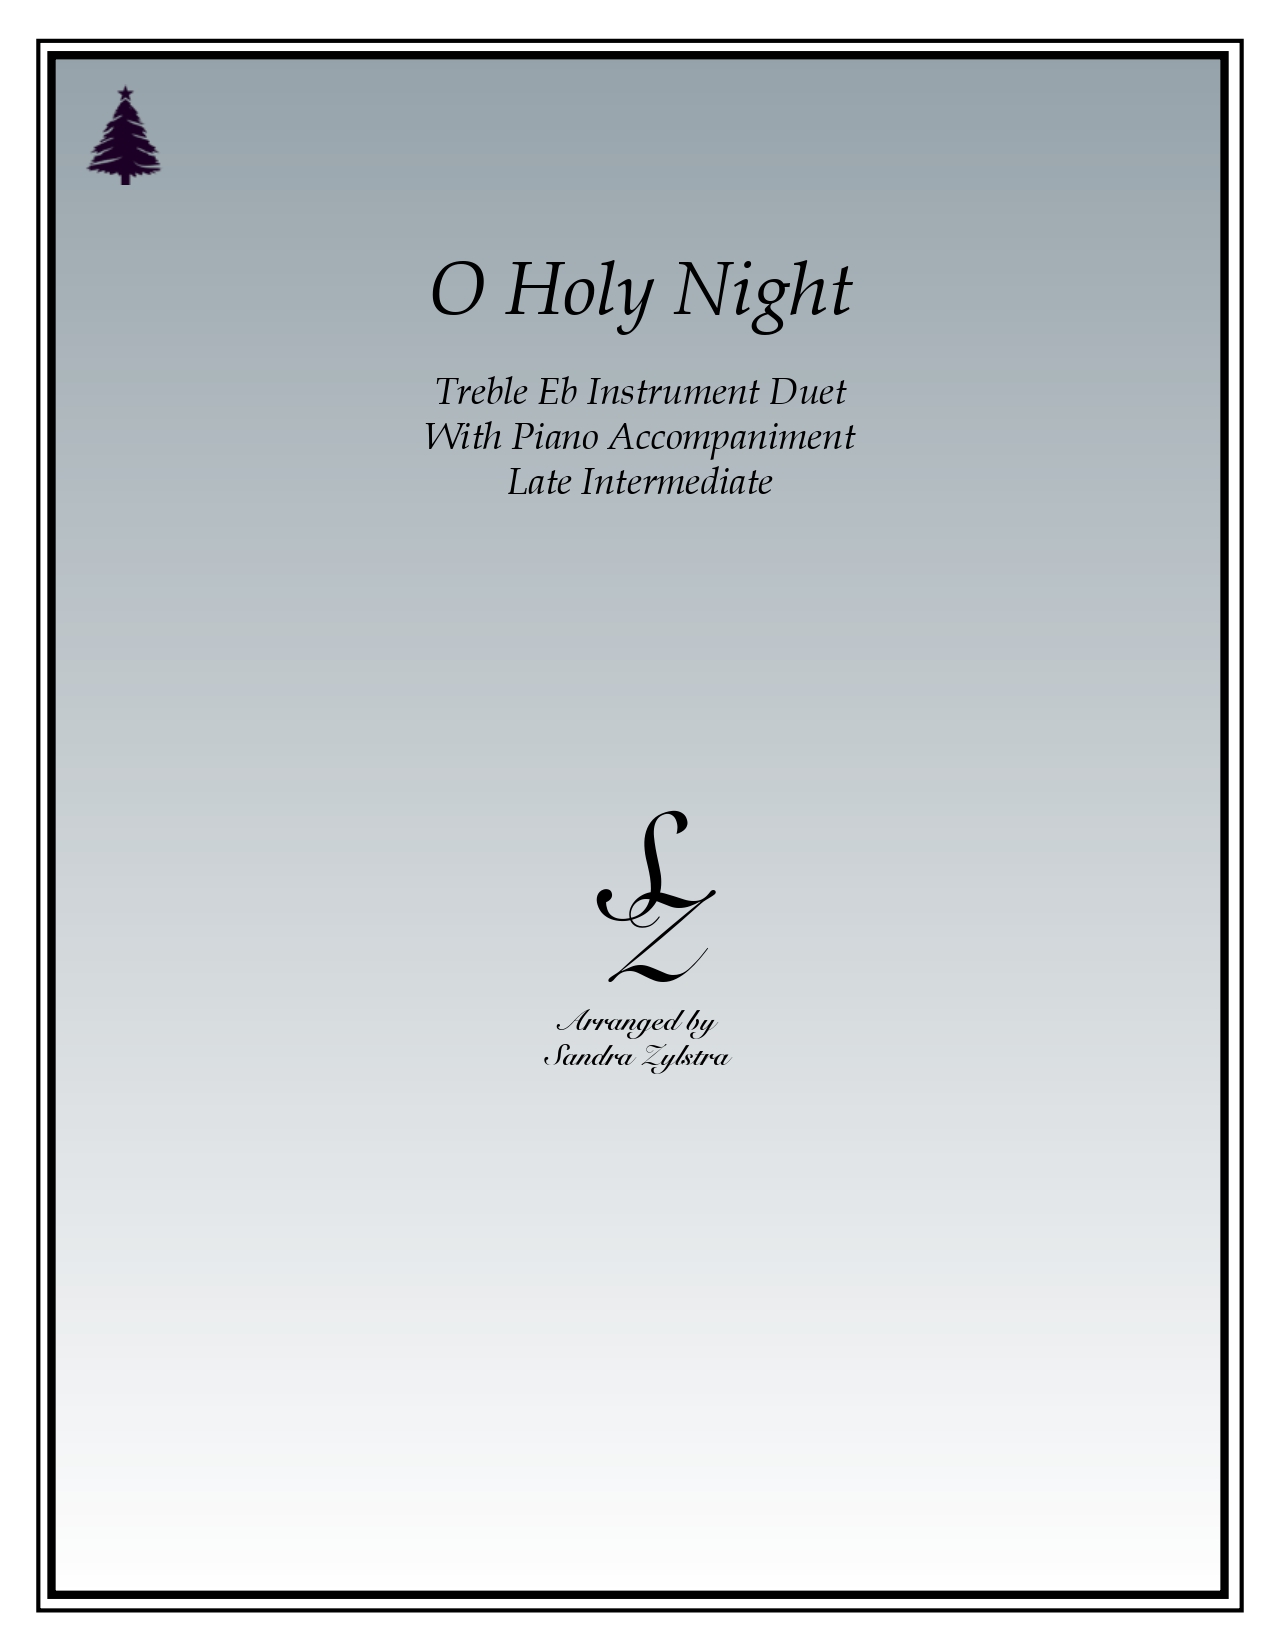 O Holy Night Eb instrument duet part cover page 00011